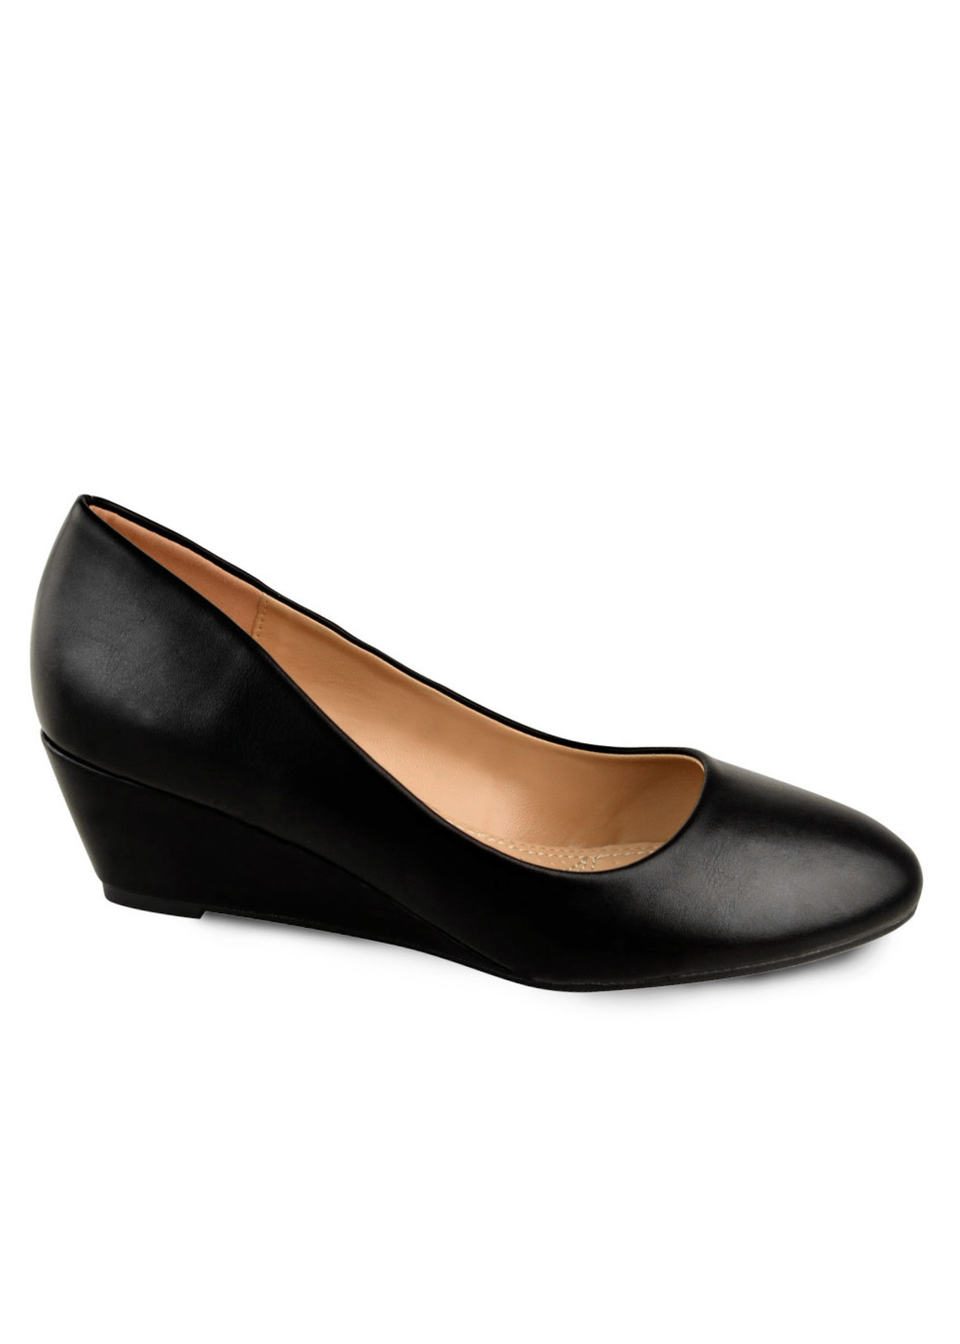 Where's That From Black Pu Kieran Platform Wedge Court Shoes